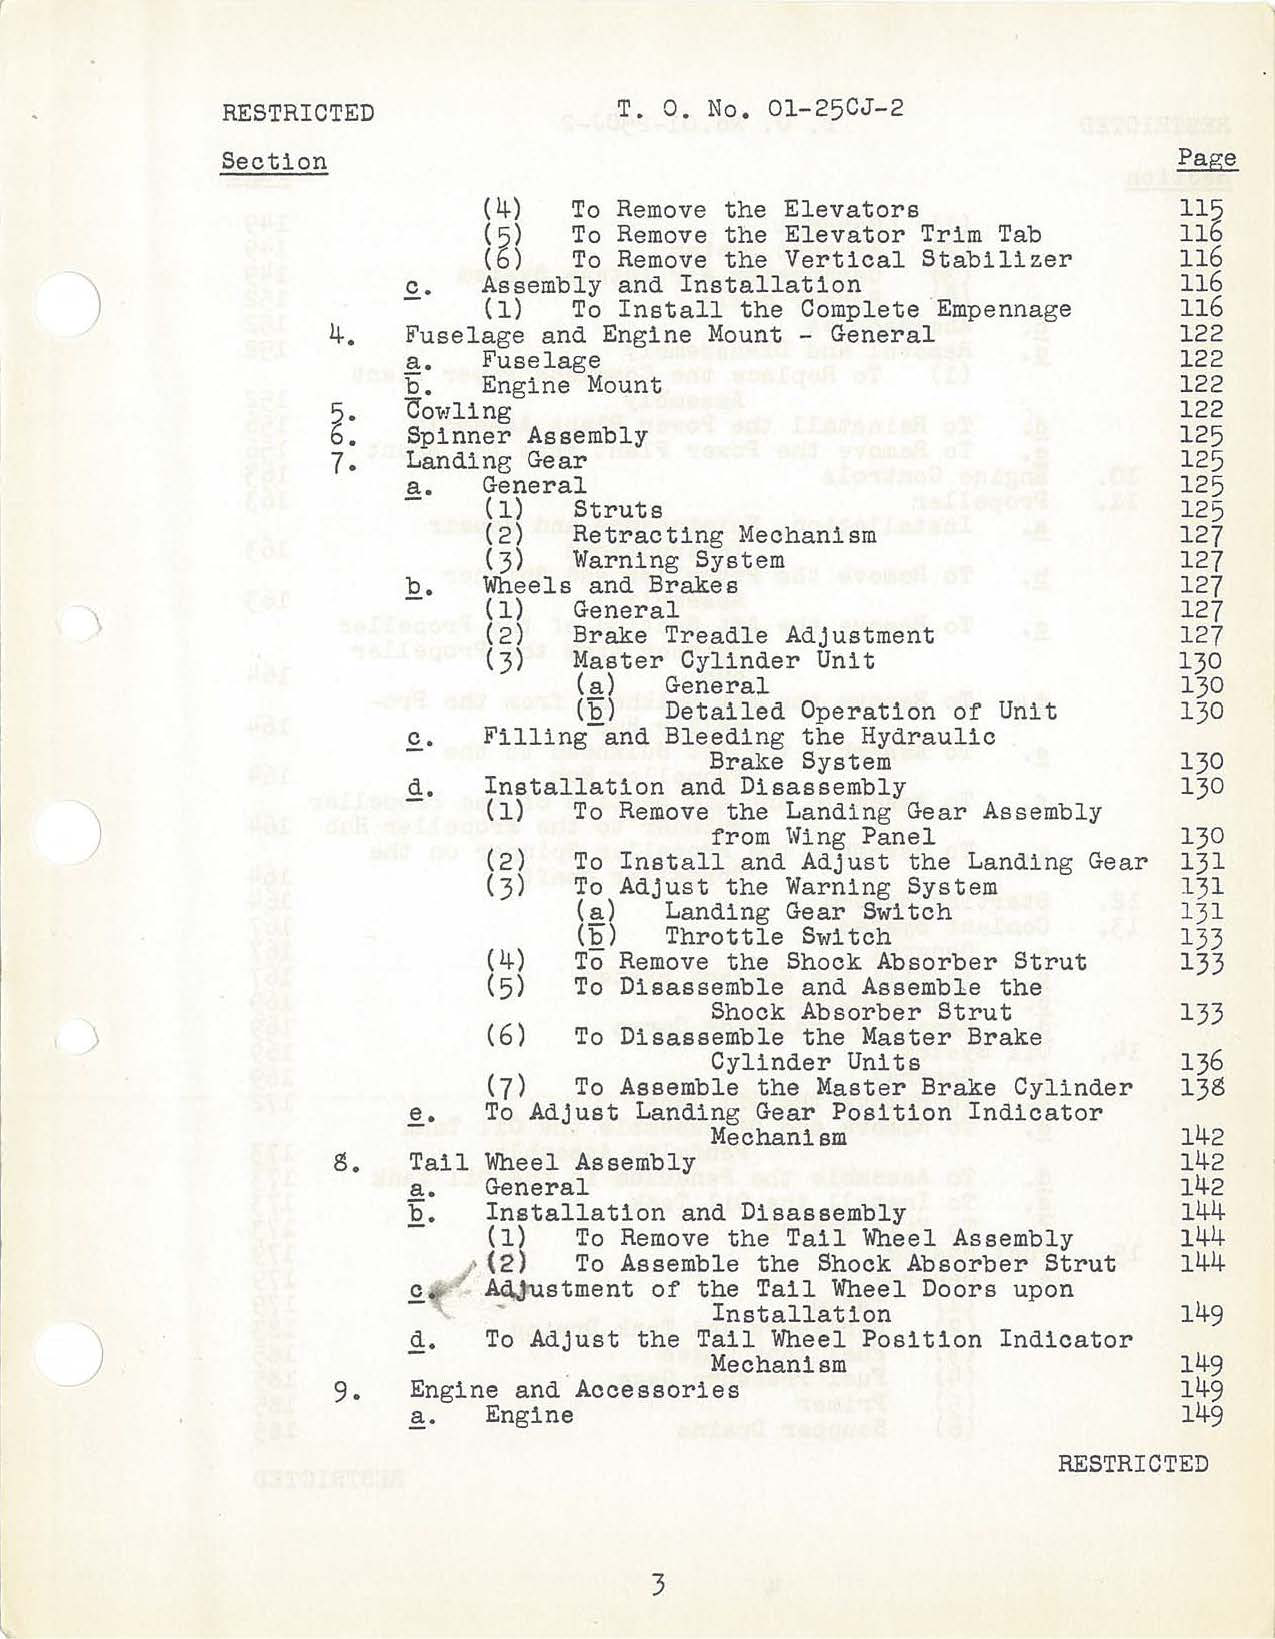 Sample page 7 from AirCorps Library document: Service Instructions for P-40E-1 Fighter